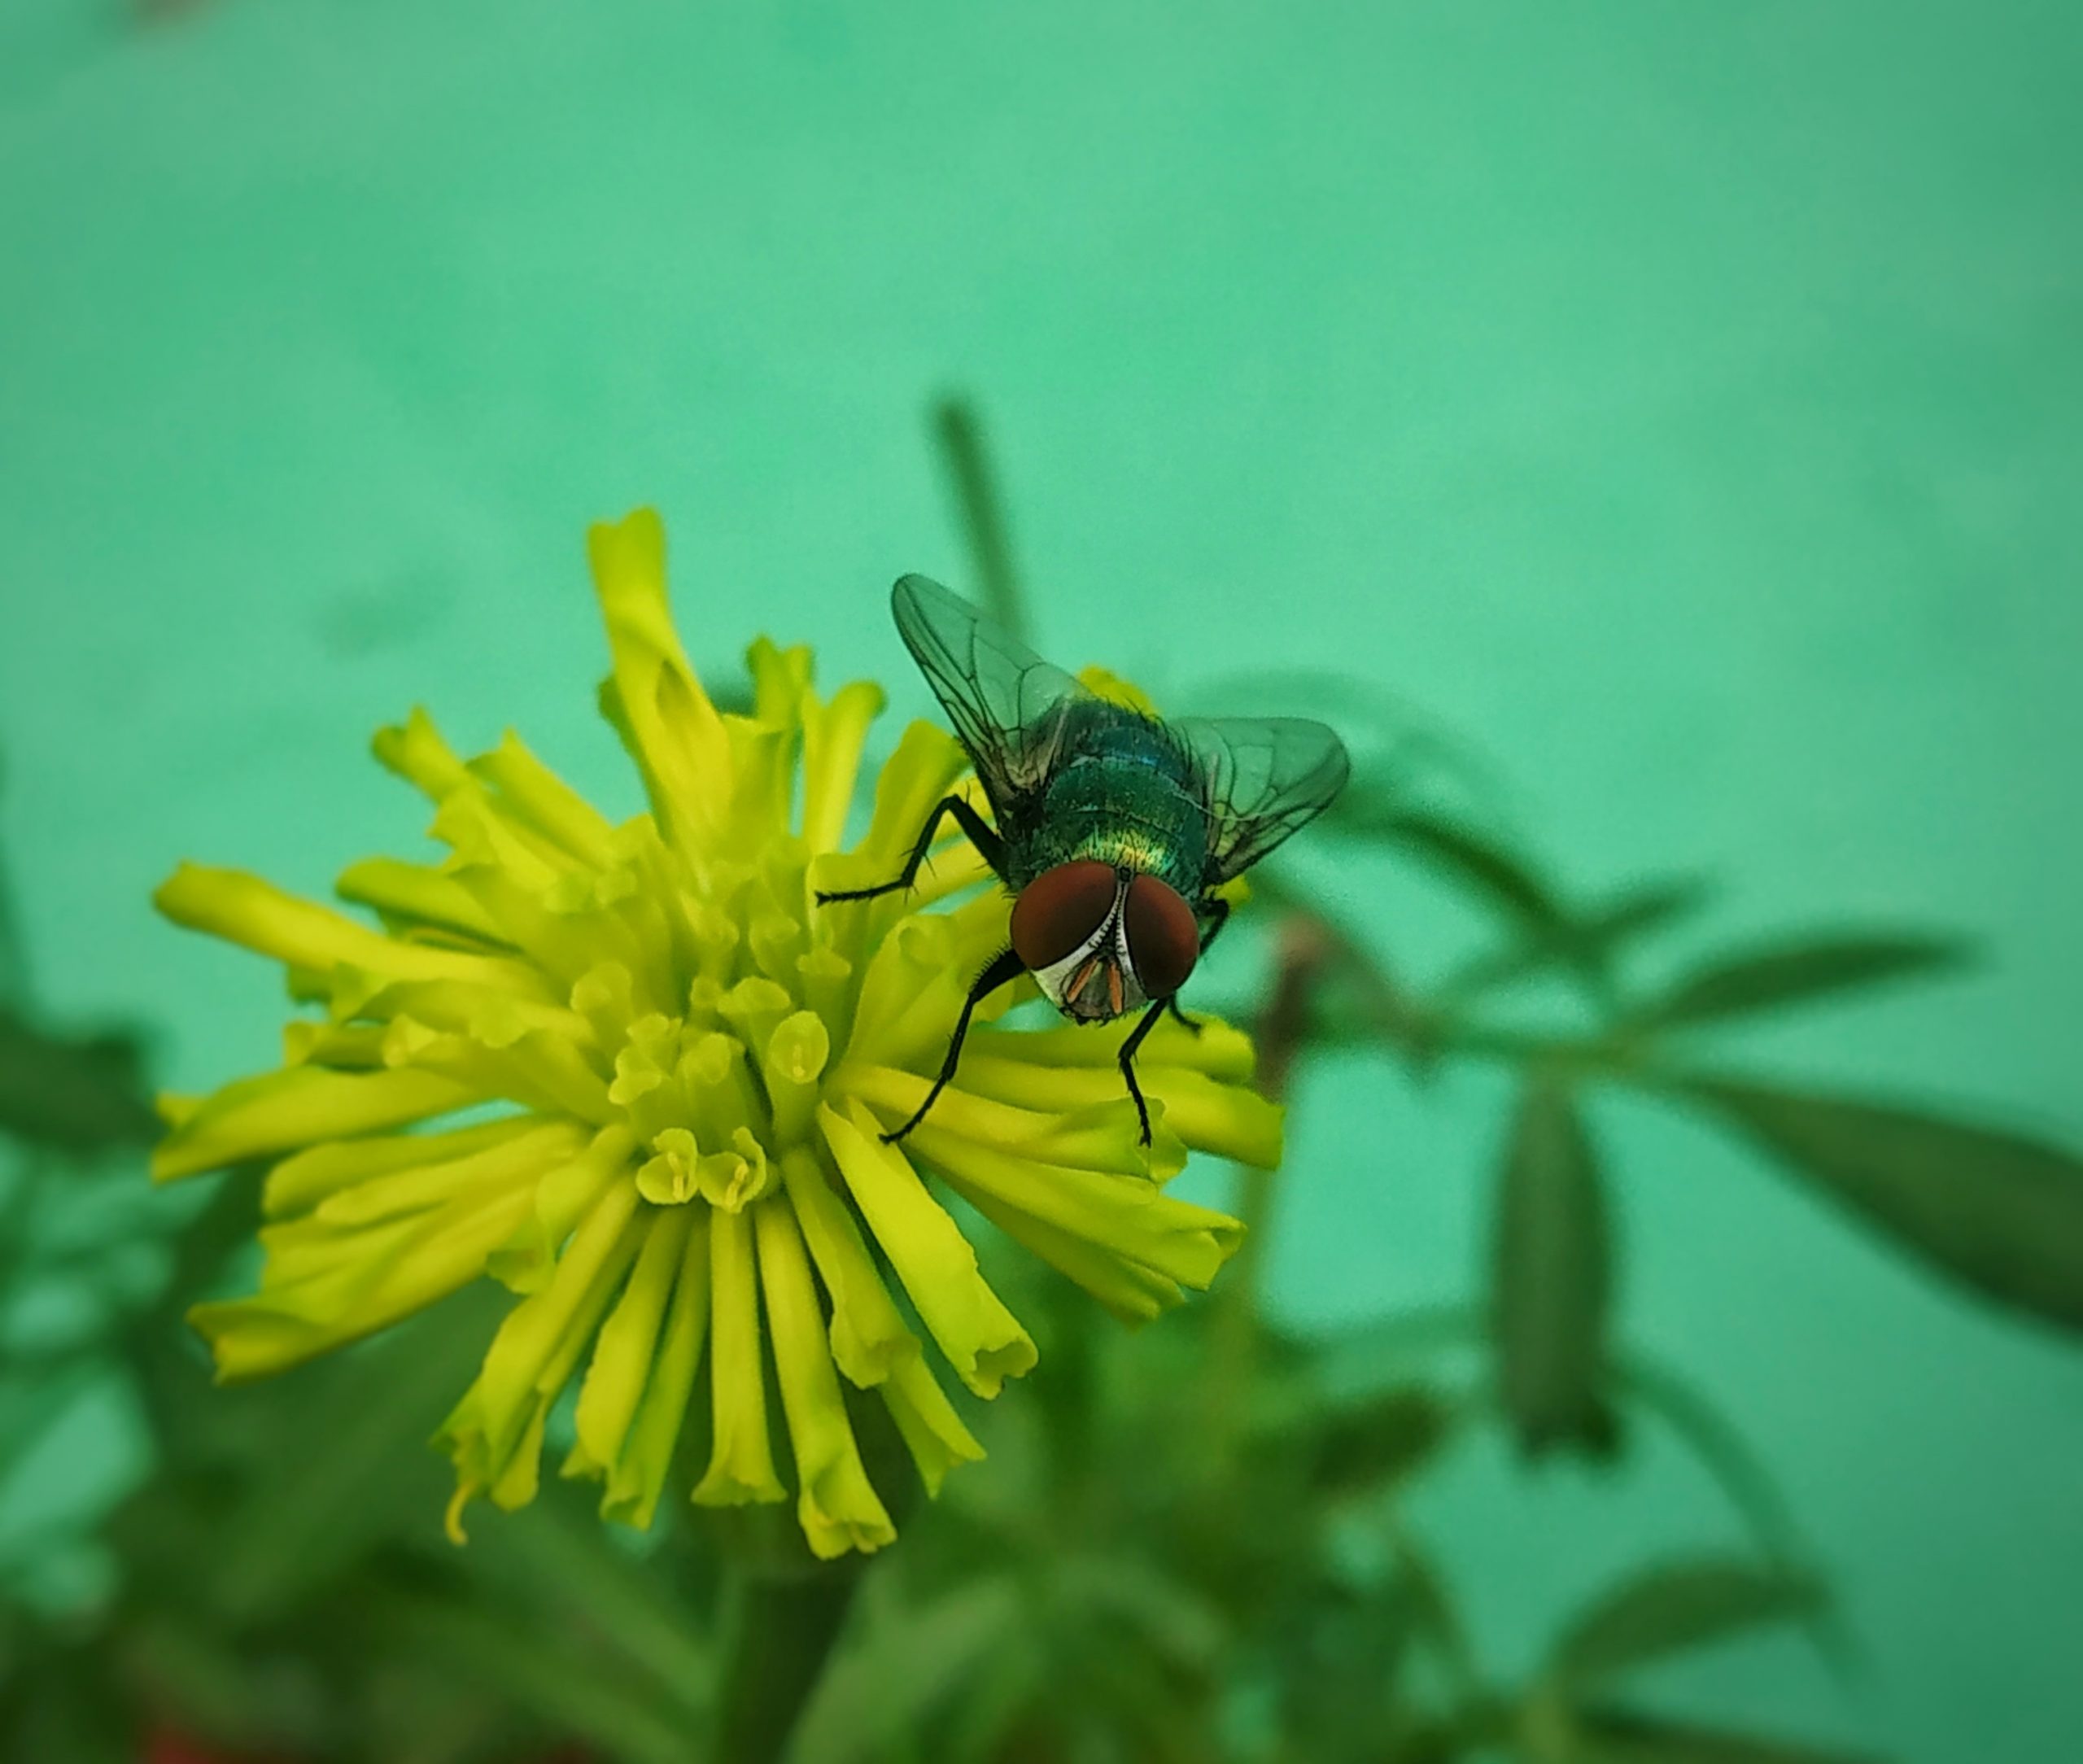 Housefly on a flower